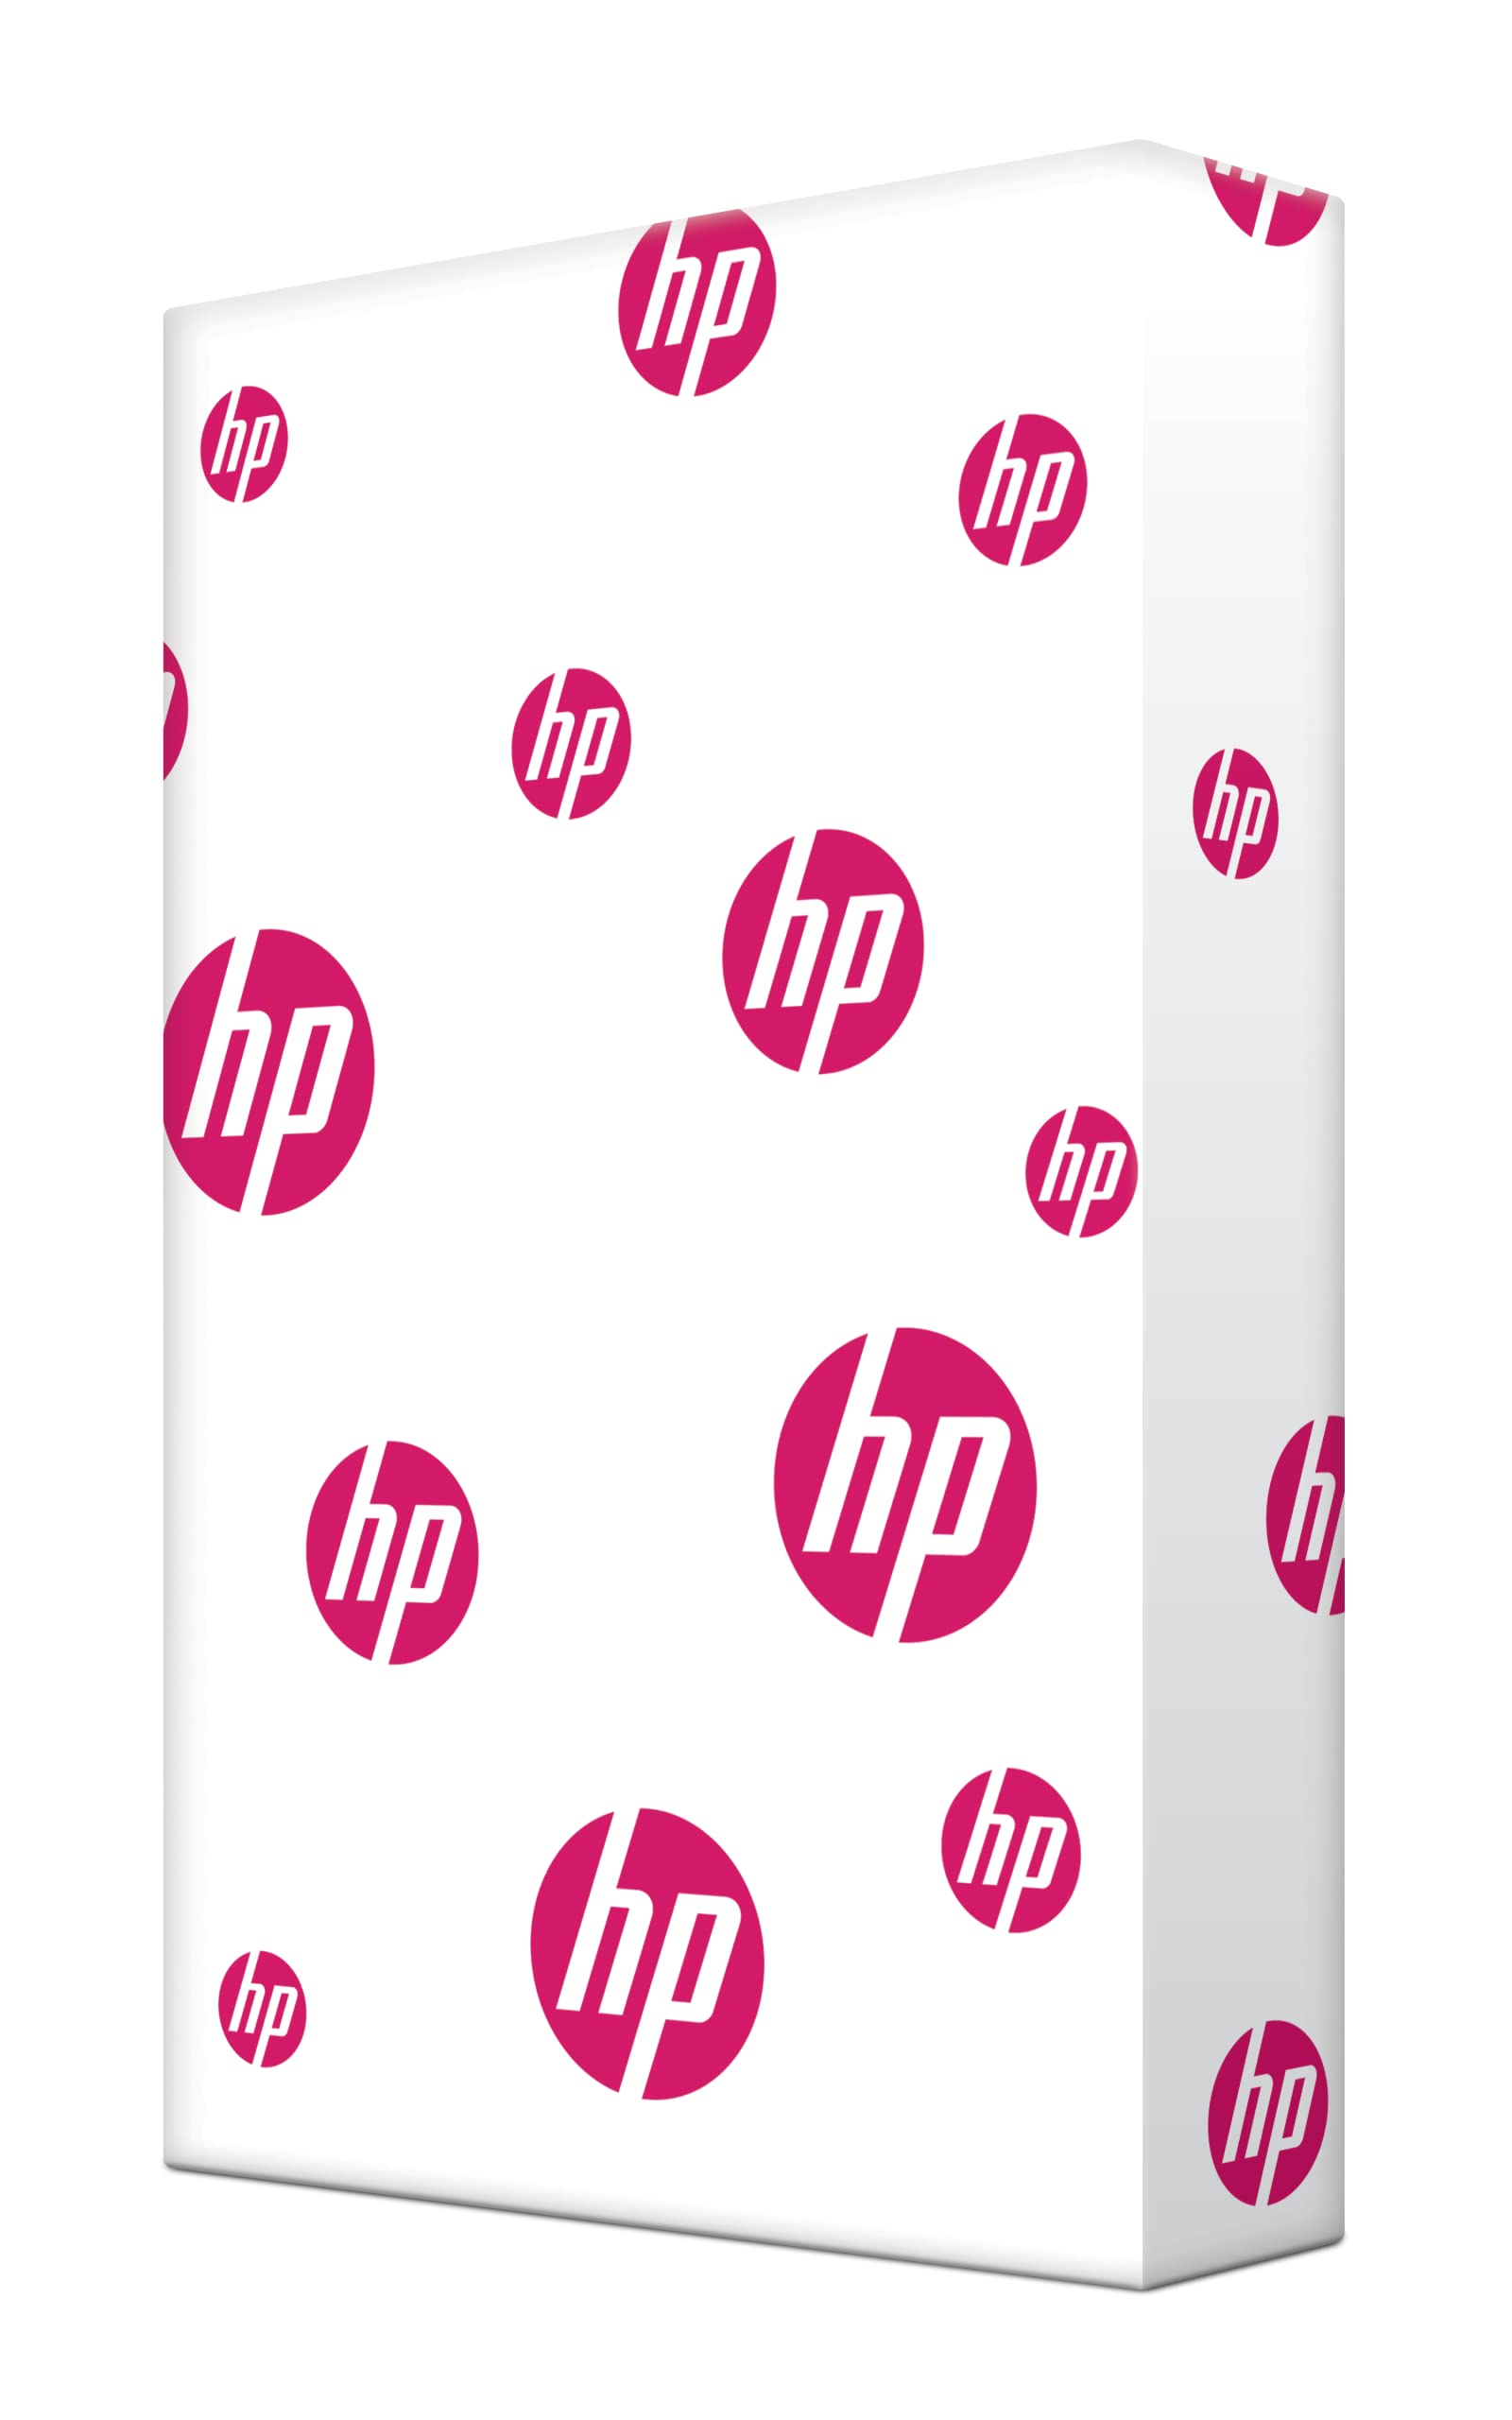 HP Papers HP Printer Paper | 11x17 Paper | MultiPurpose 20 lb |1 Ream - 500 Sheets |96 Bright | Made in USA - FSC Certified | 172001R